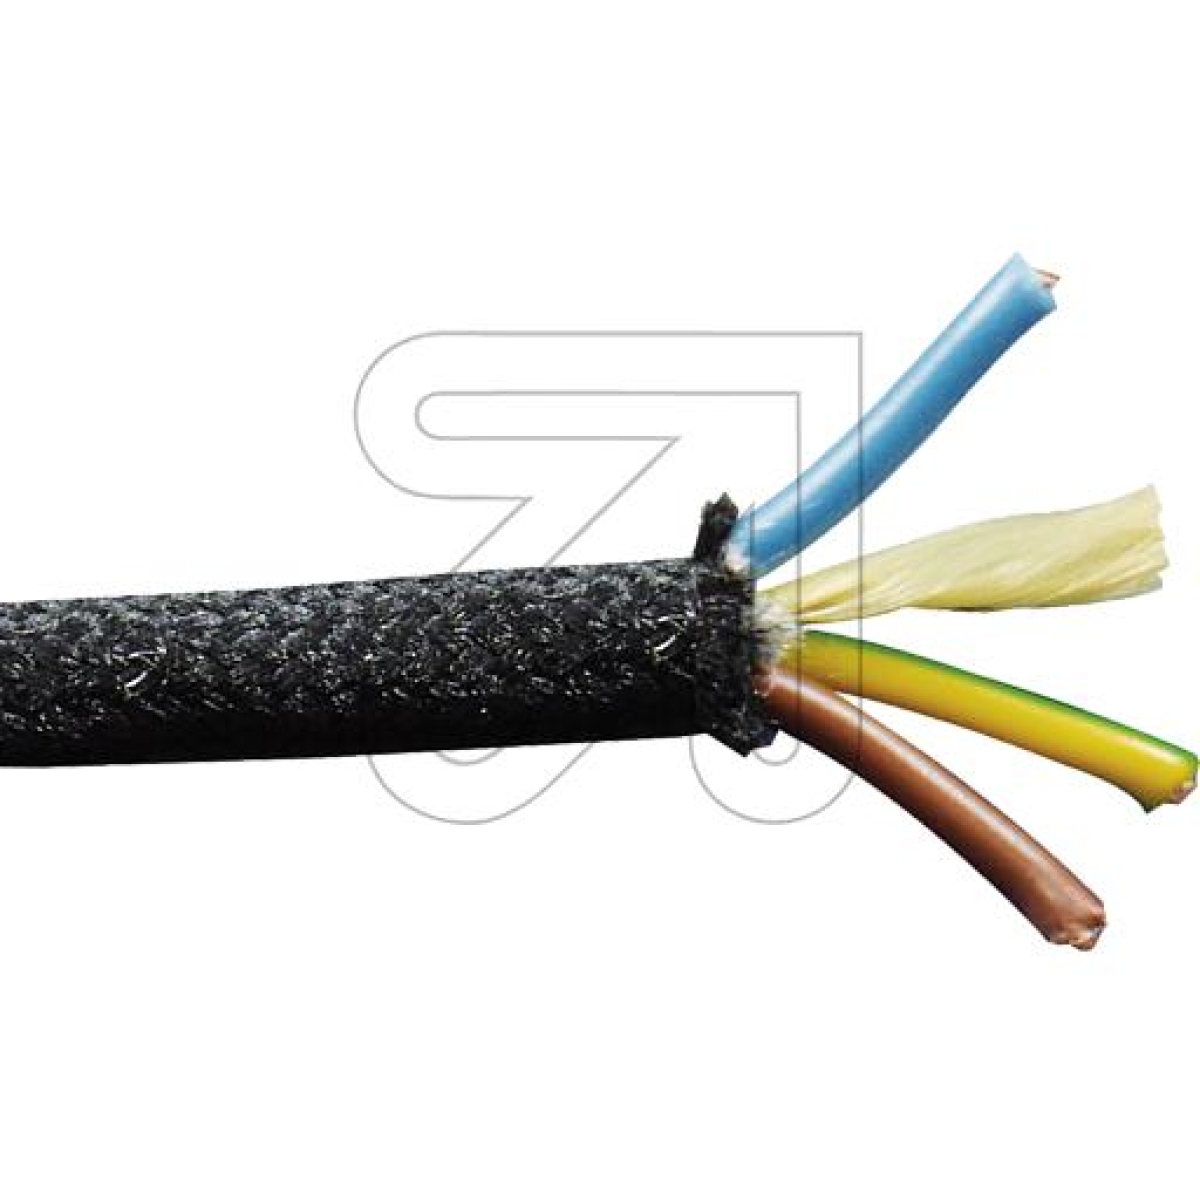 EGBTextile sheathed cable 3-Liy-Uf 3x075 blackArticle-No: 362800